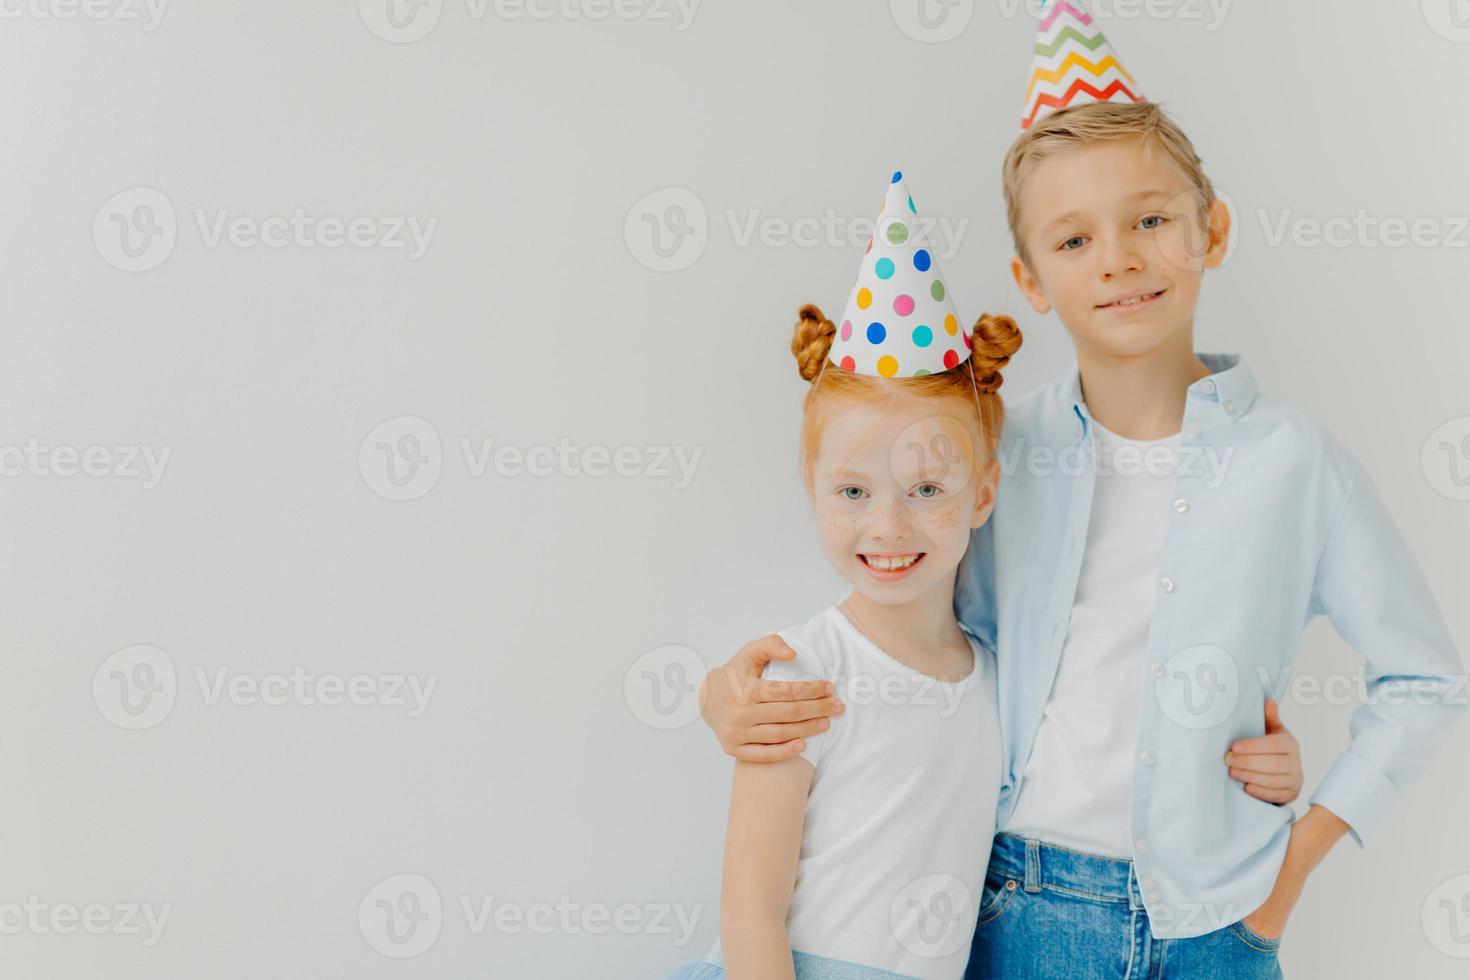 Isolated shot of happy broher and sister cuddle each other, have positive expressions, wear party hats, going to celebrate birthday, stand against white background, copy space aside. Cheerful children photo